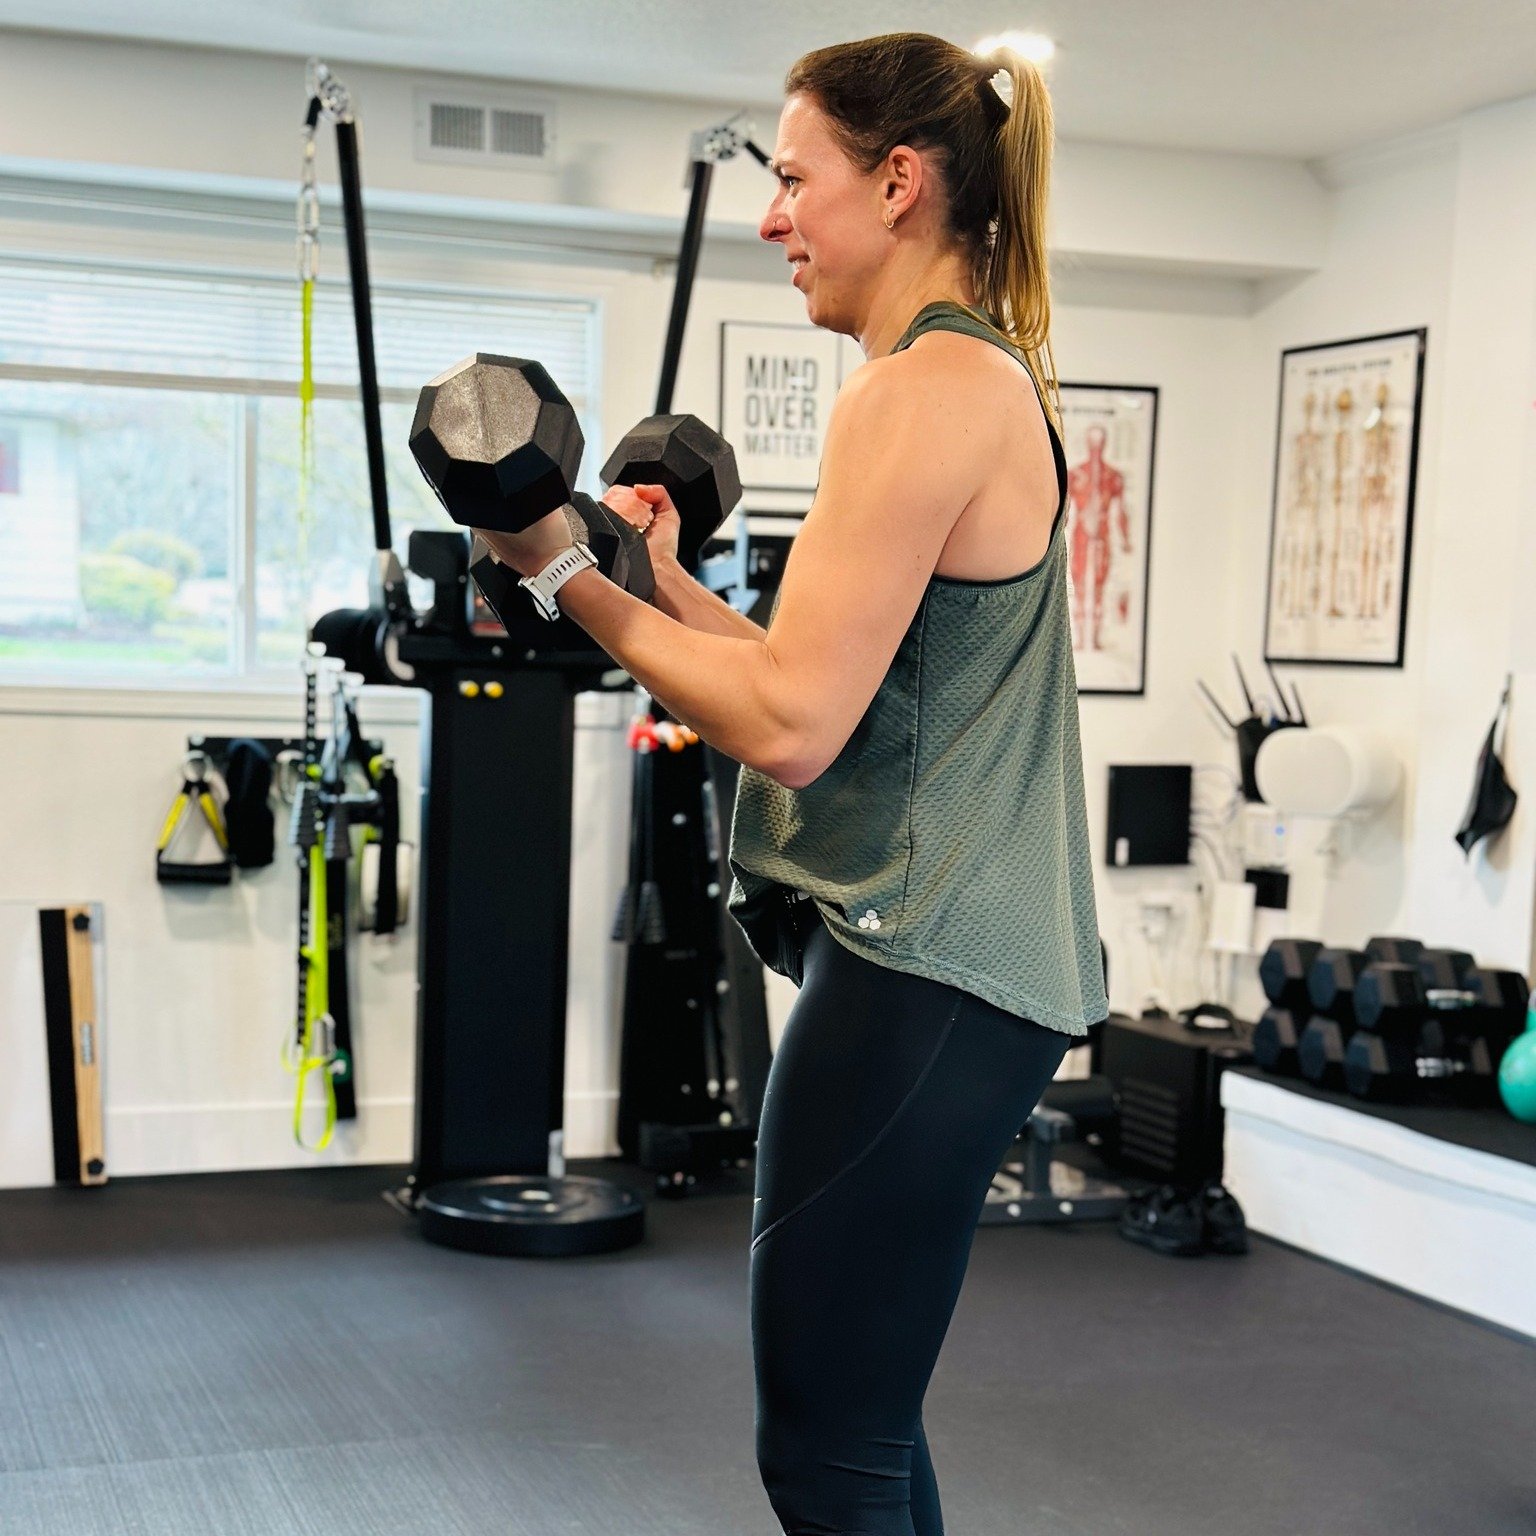 Let's get those biceps poppin'! Private and semi-private personal training is waiting for you. Connect today for your free consultation. # #fitnesstrainer #gym #portlandpersonaltrainer #portand #personaltraining #westlinn #privatepersonaltrainer #wor